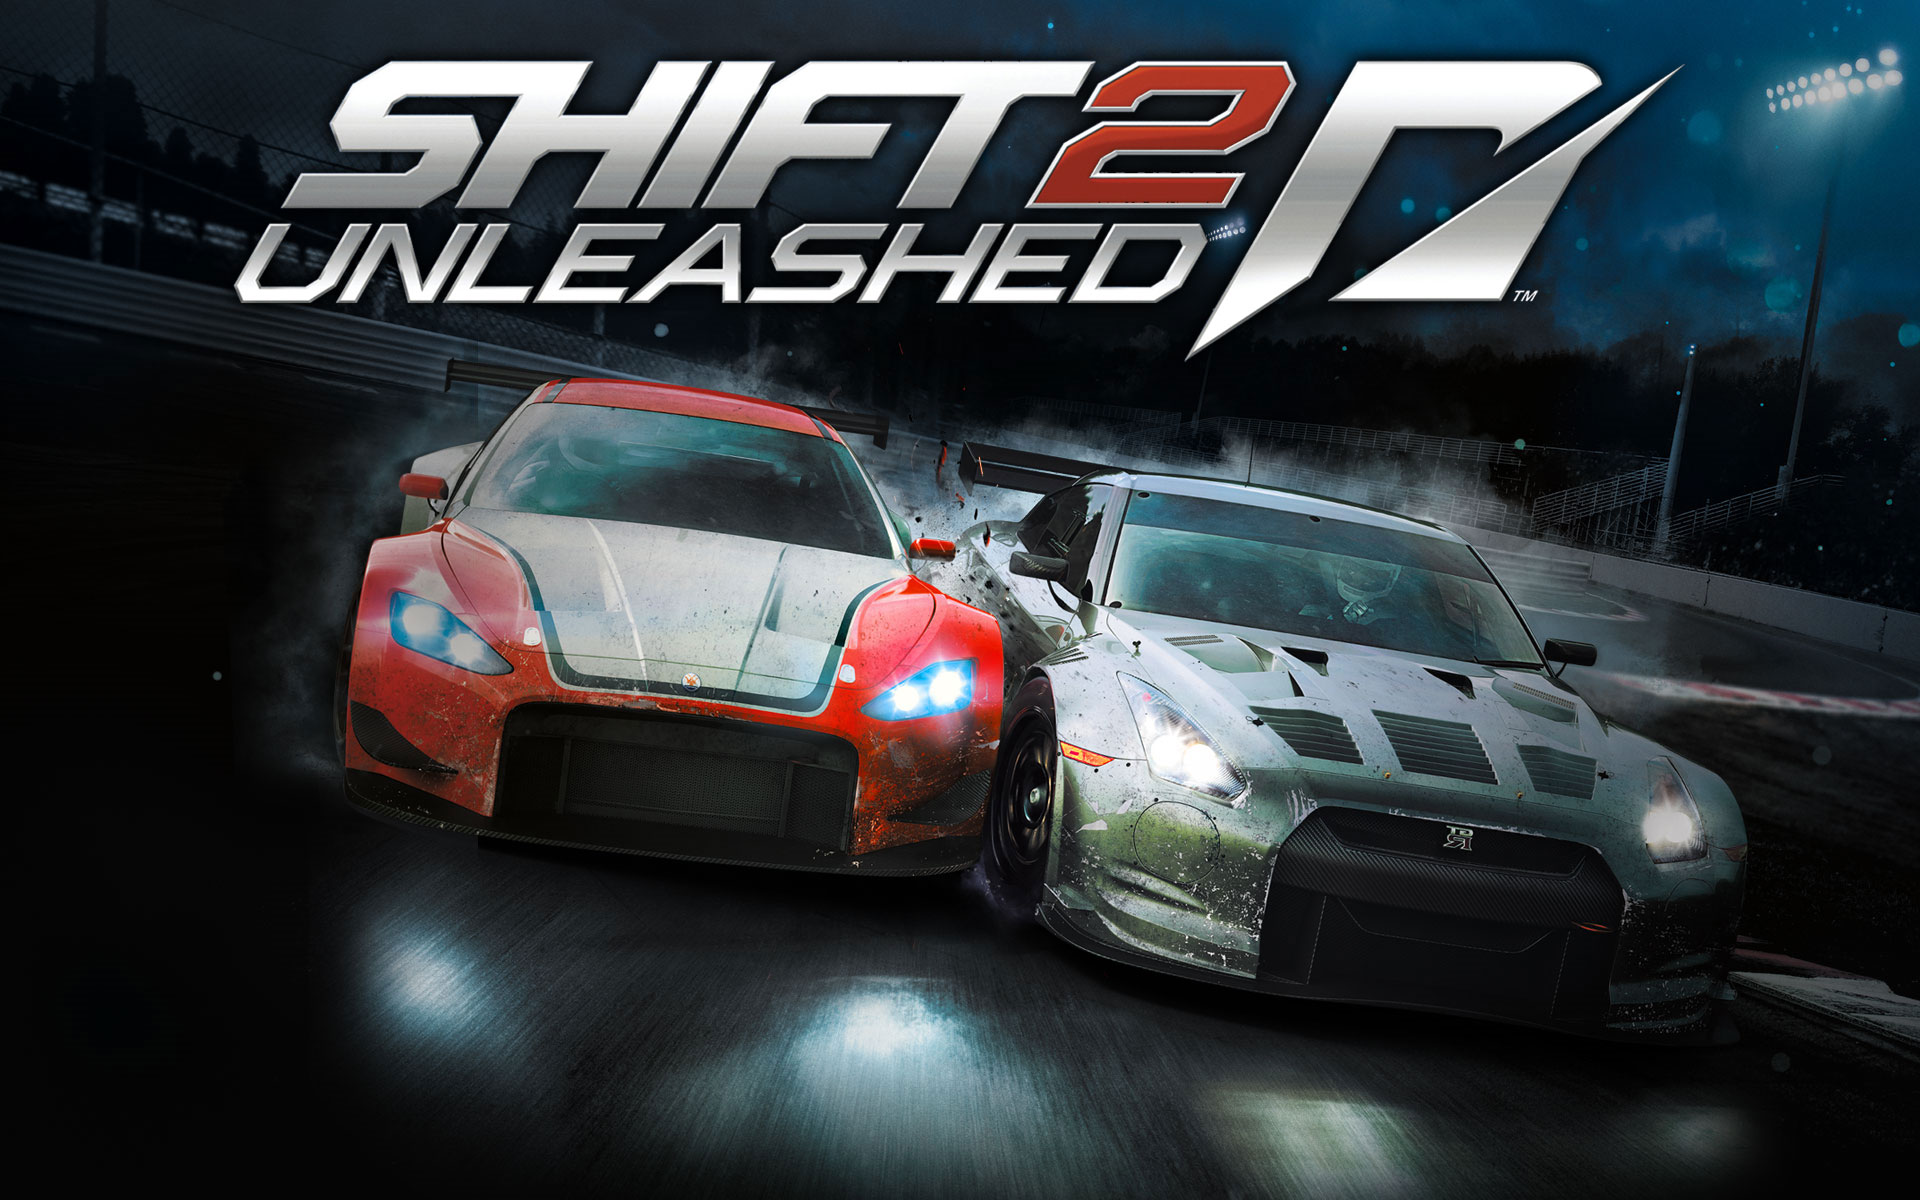 Shift II: Unleashed PS3 Review